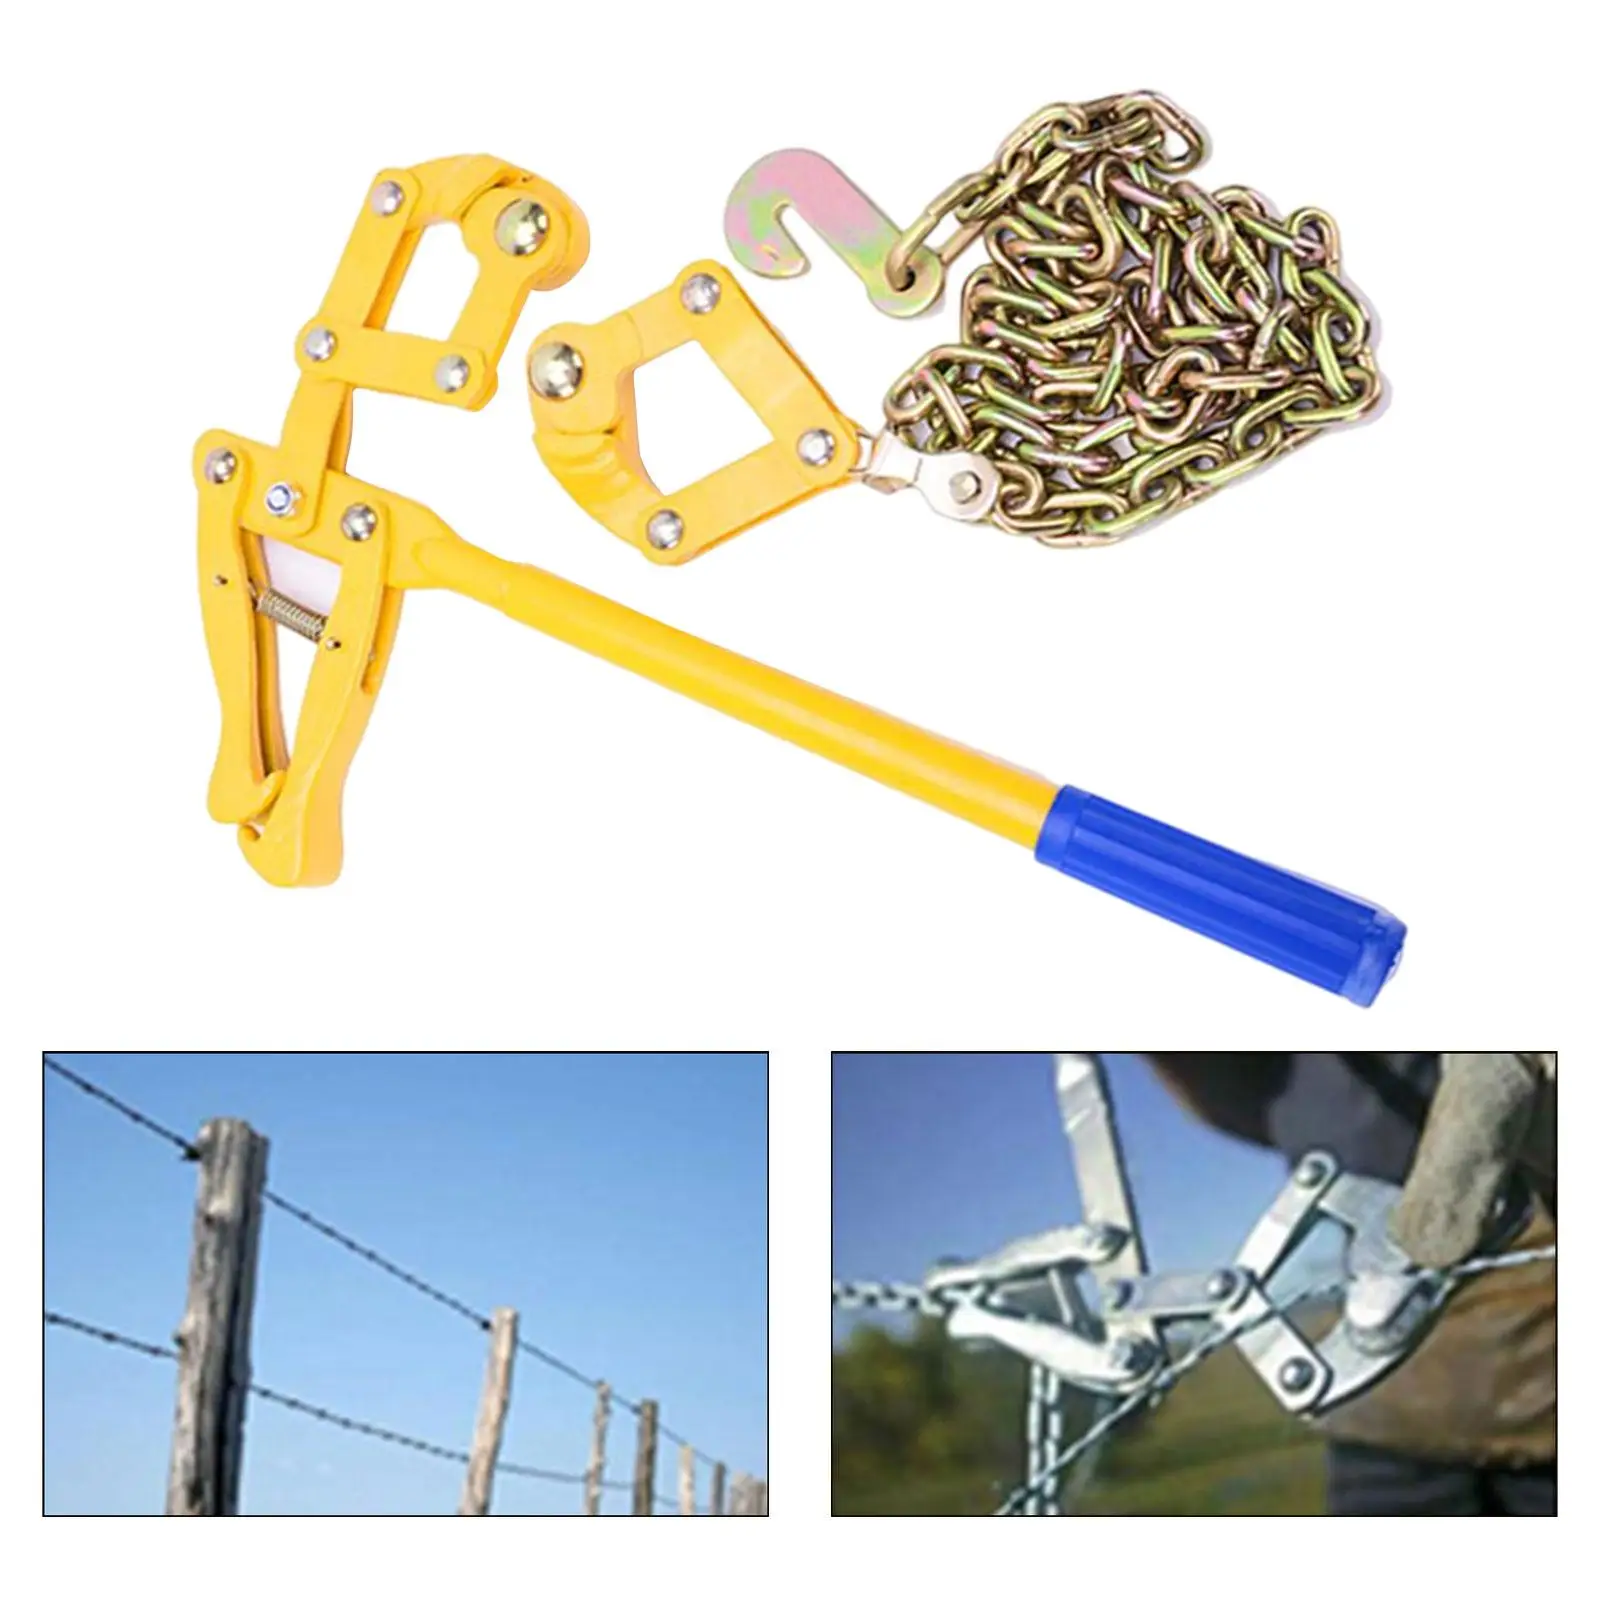 Heavy Duty Chain Fence Strainer Fence Puller Repair Tool Fence Plain Barbed Wire Strainer for Farm Fencing Cattle Barn